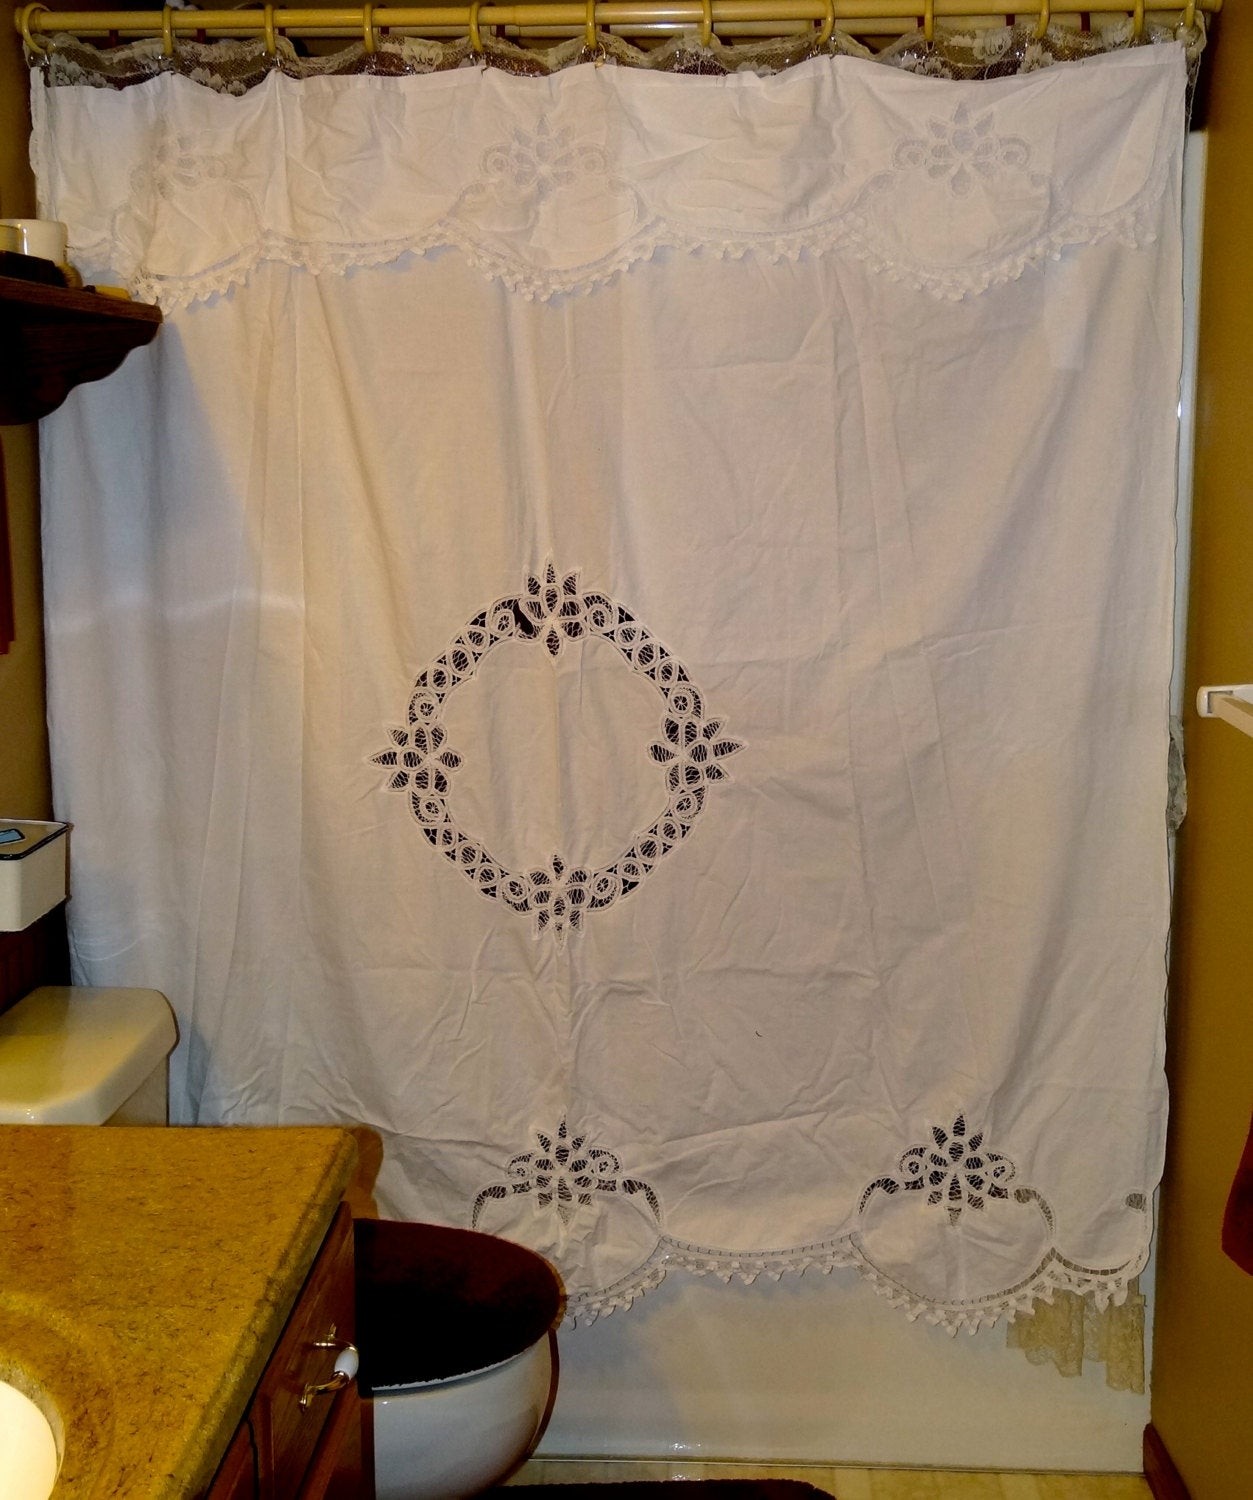 Vintage battenburg lace shower curtain with attached valance